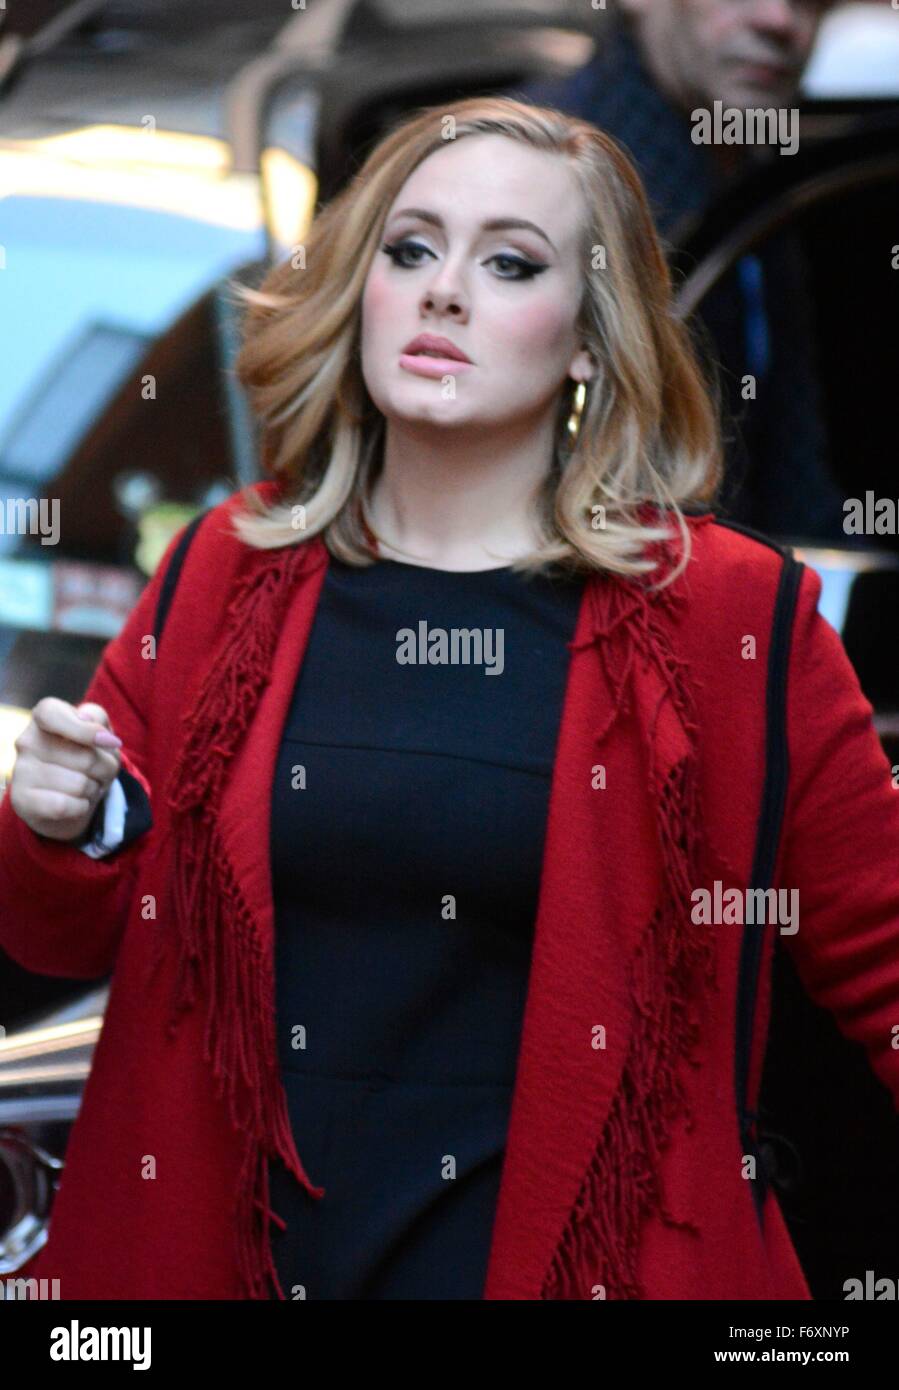 New York, NY, USA. 20th Nov, 2015. Adele at arrivals for iHeartRadio Album Release Party for Adele's 25, Joe's Pub, New York, NY November 20, 2015. Credit:  Derek Storm/Everett Collection/Alamy Live News Stock Photo